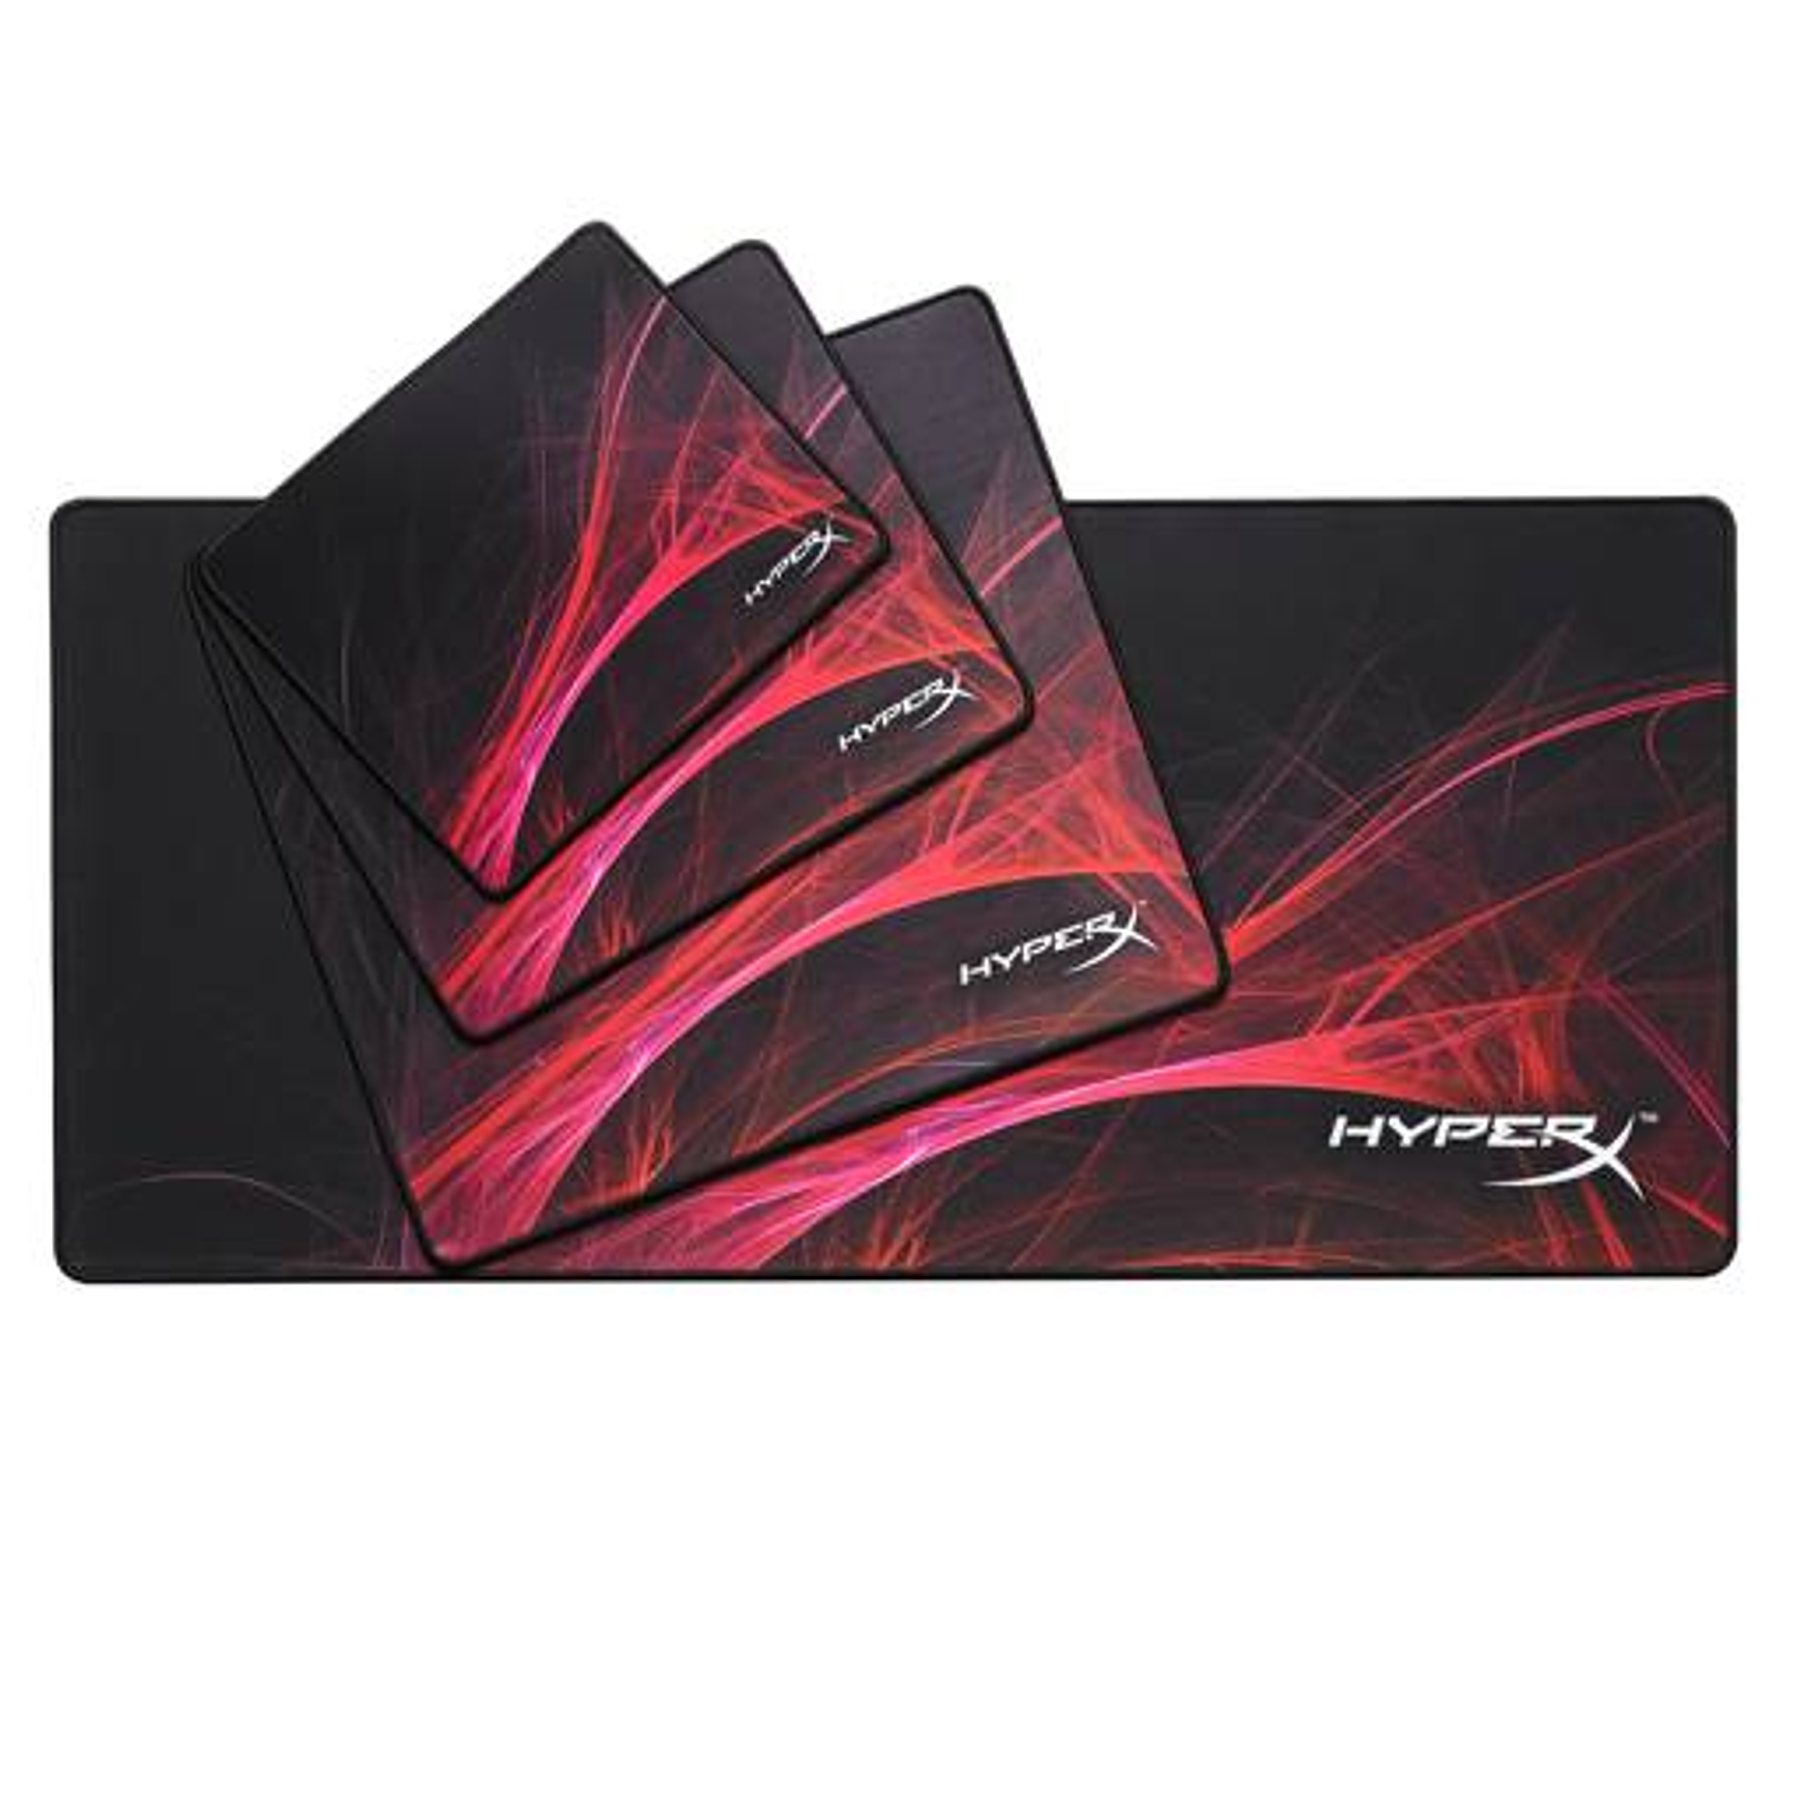 HPX Pad Mouse FURY S Pro (L) Speed Edition 450mm x 400mm